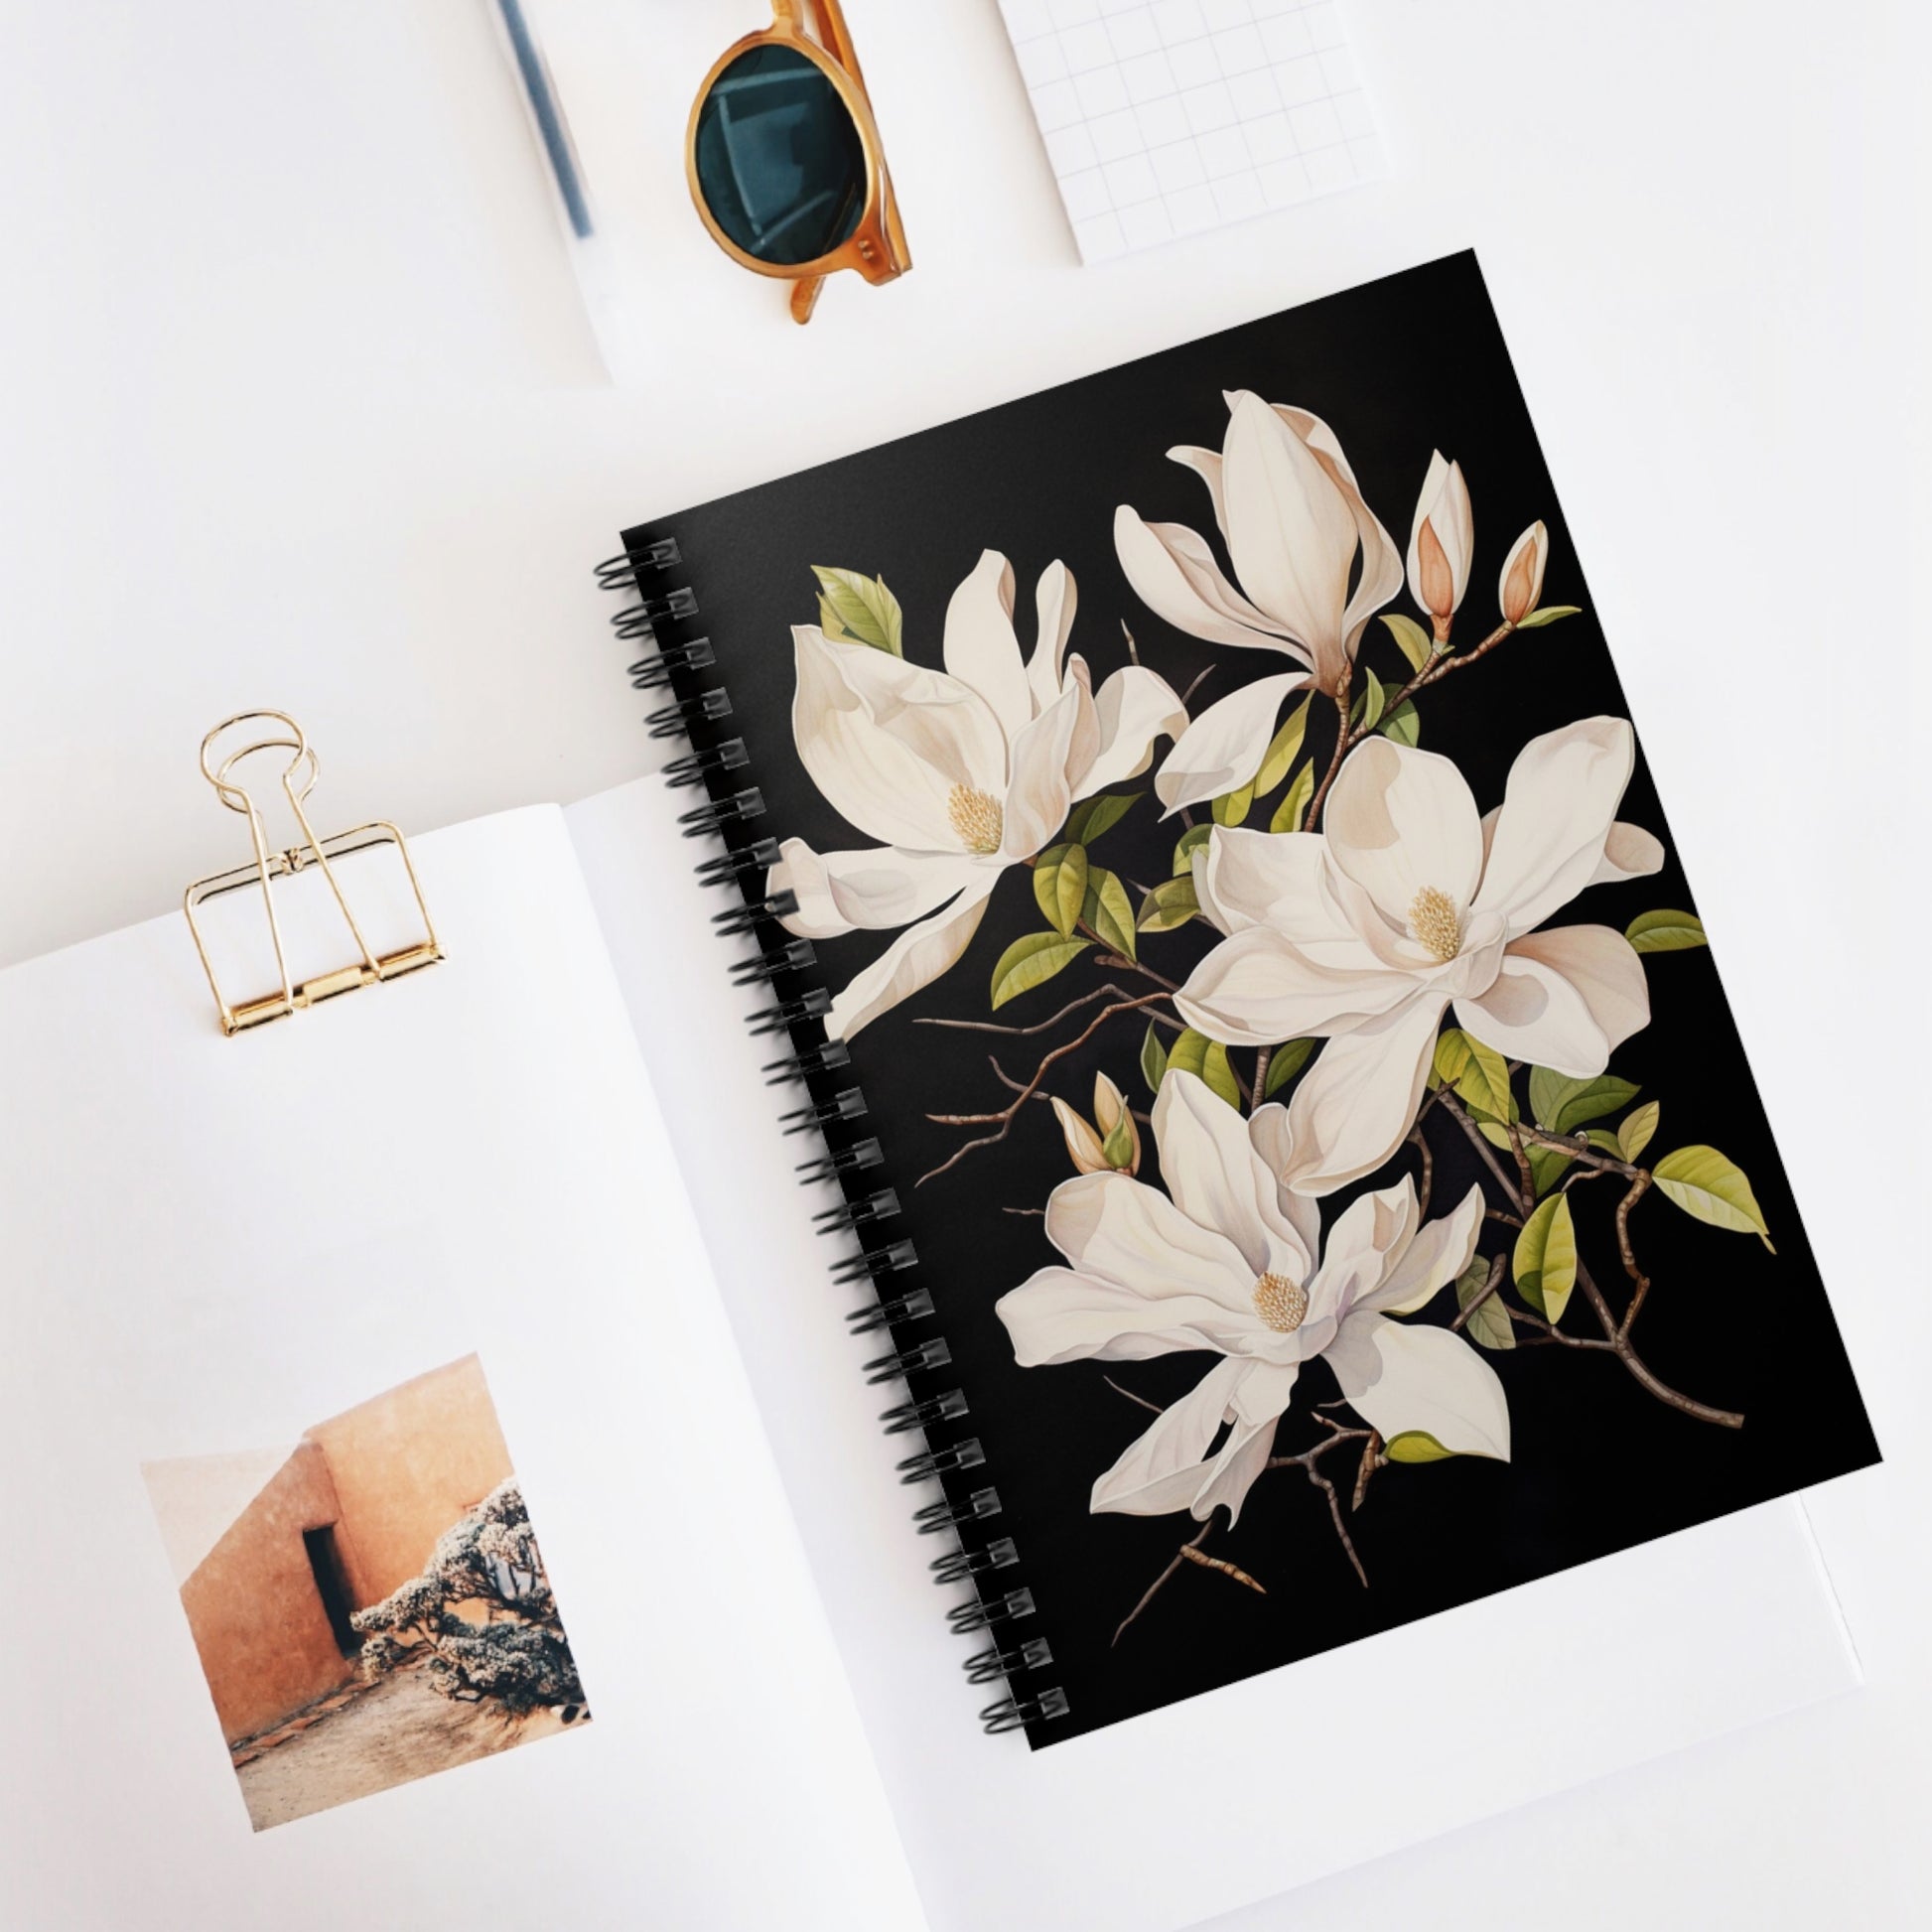 White Magnolias Spiral Bound Notebook, Flowers Floral Travel Pattern Design Small Journal Notepad Ruled Line Book Pad Work Hard Cover Starcove Fashion